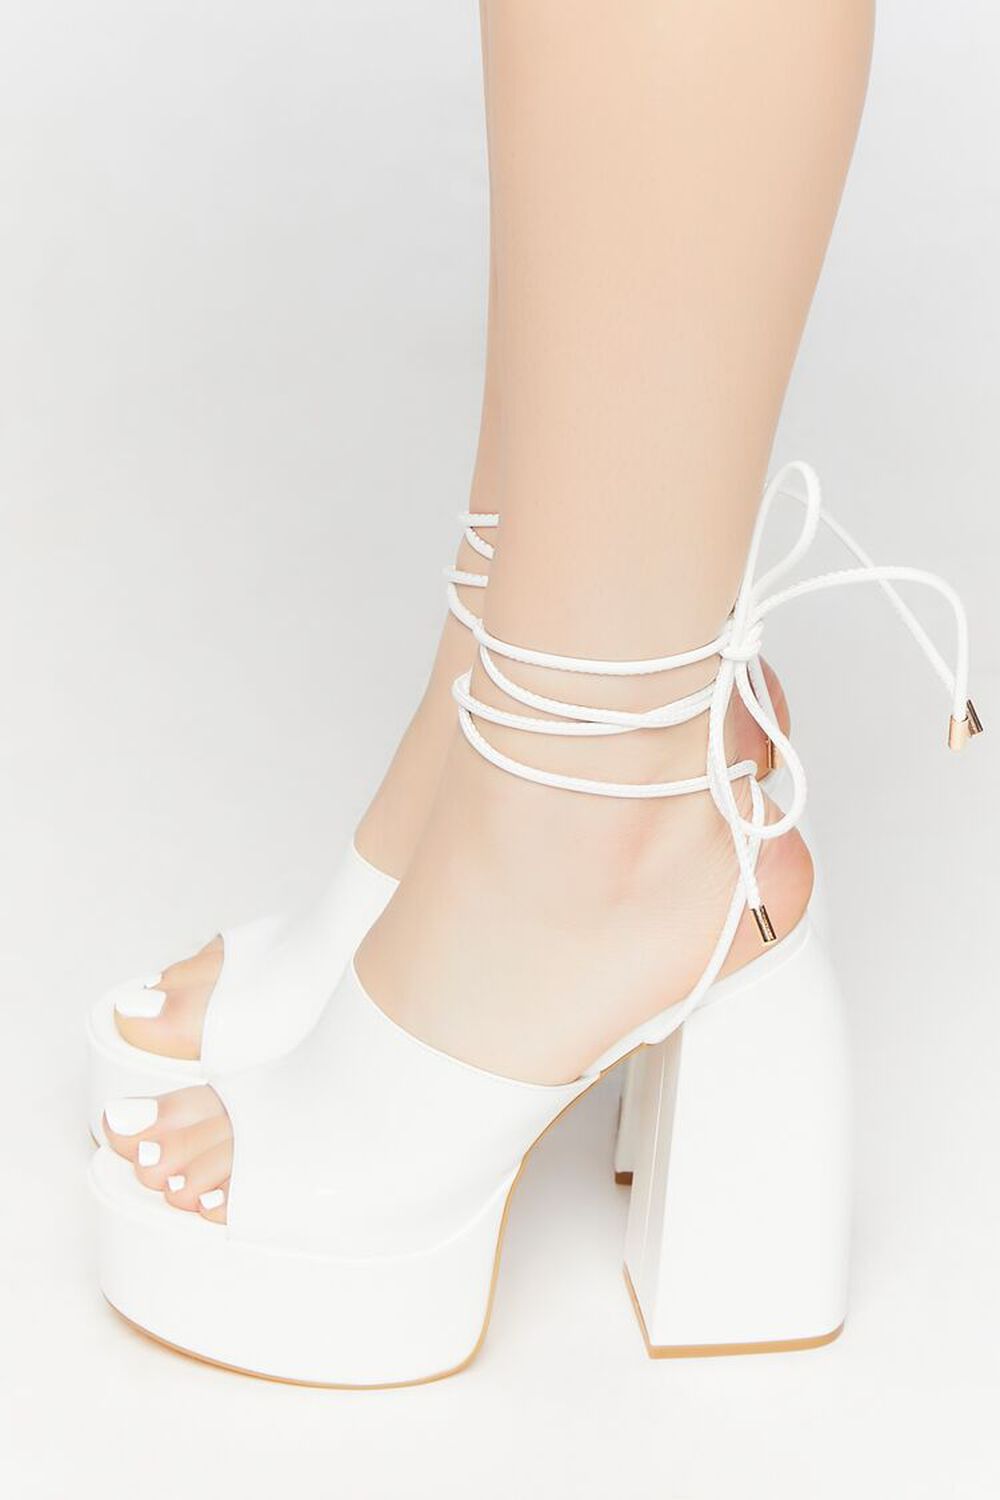 WHITE Faux Patent Leather Lace-Up Heels, image 2